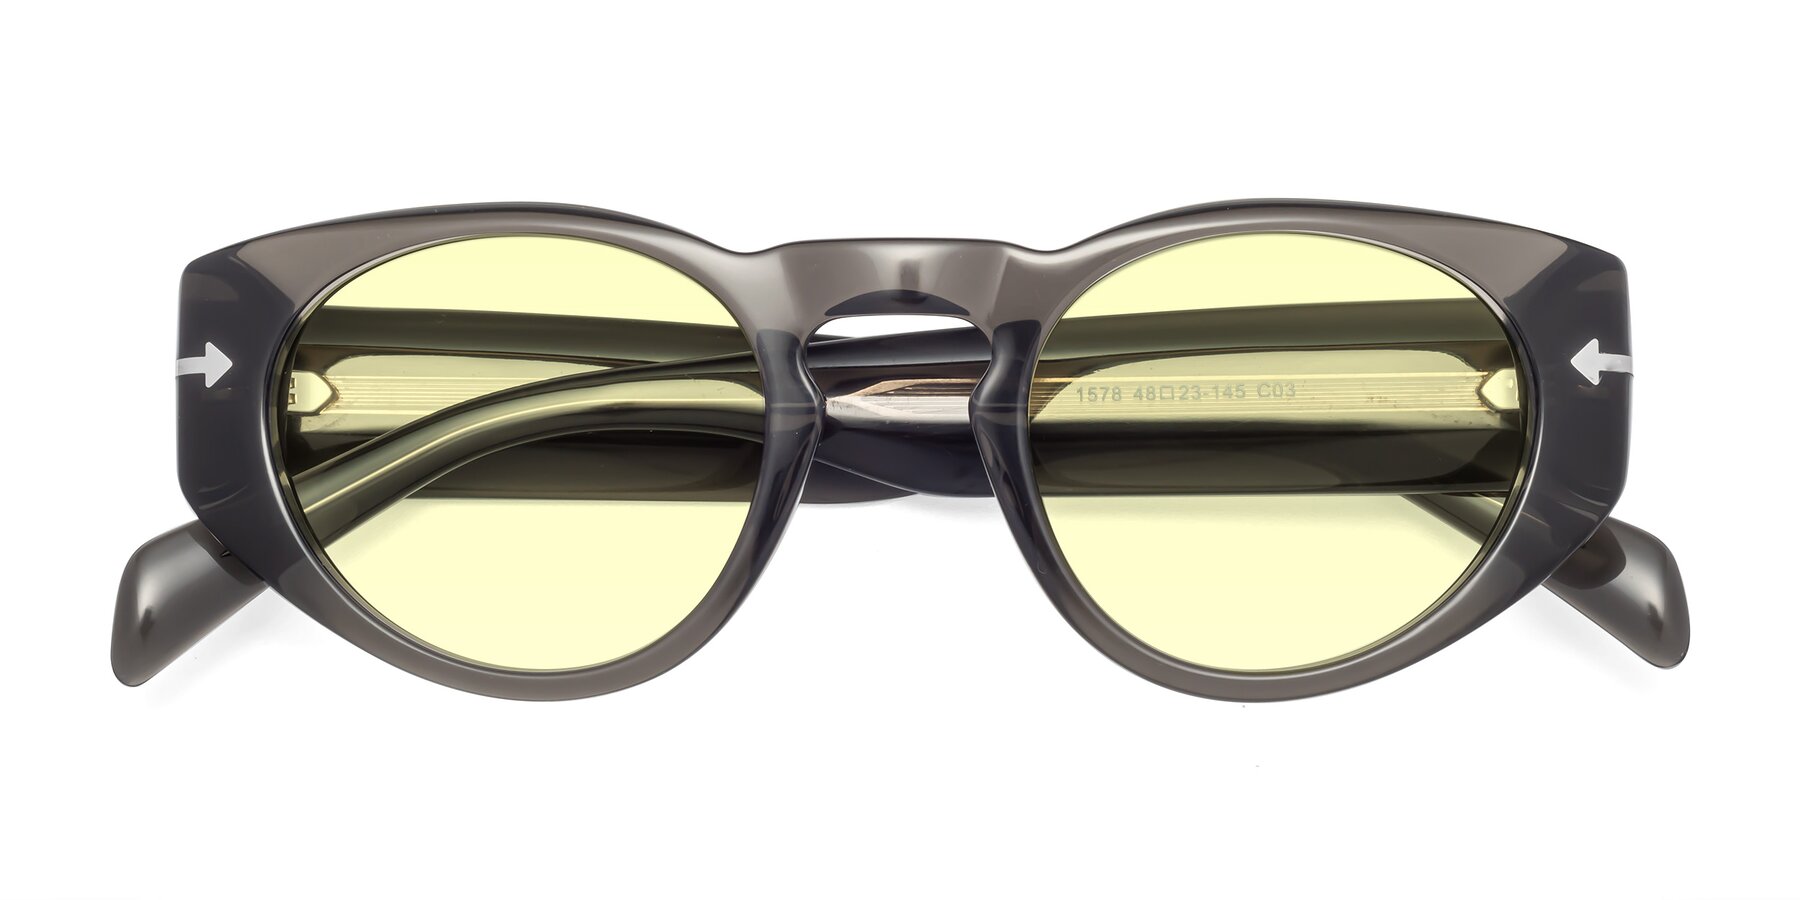 Translucent Gray Thick Geek-Chic Geometric Tinted Sunglasses with Light Yellow Sunwear Lenses